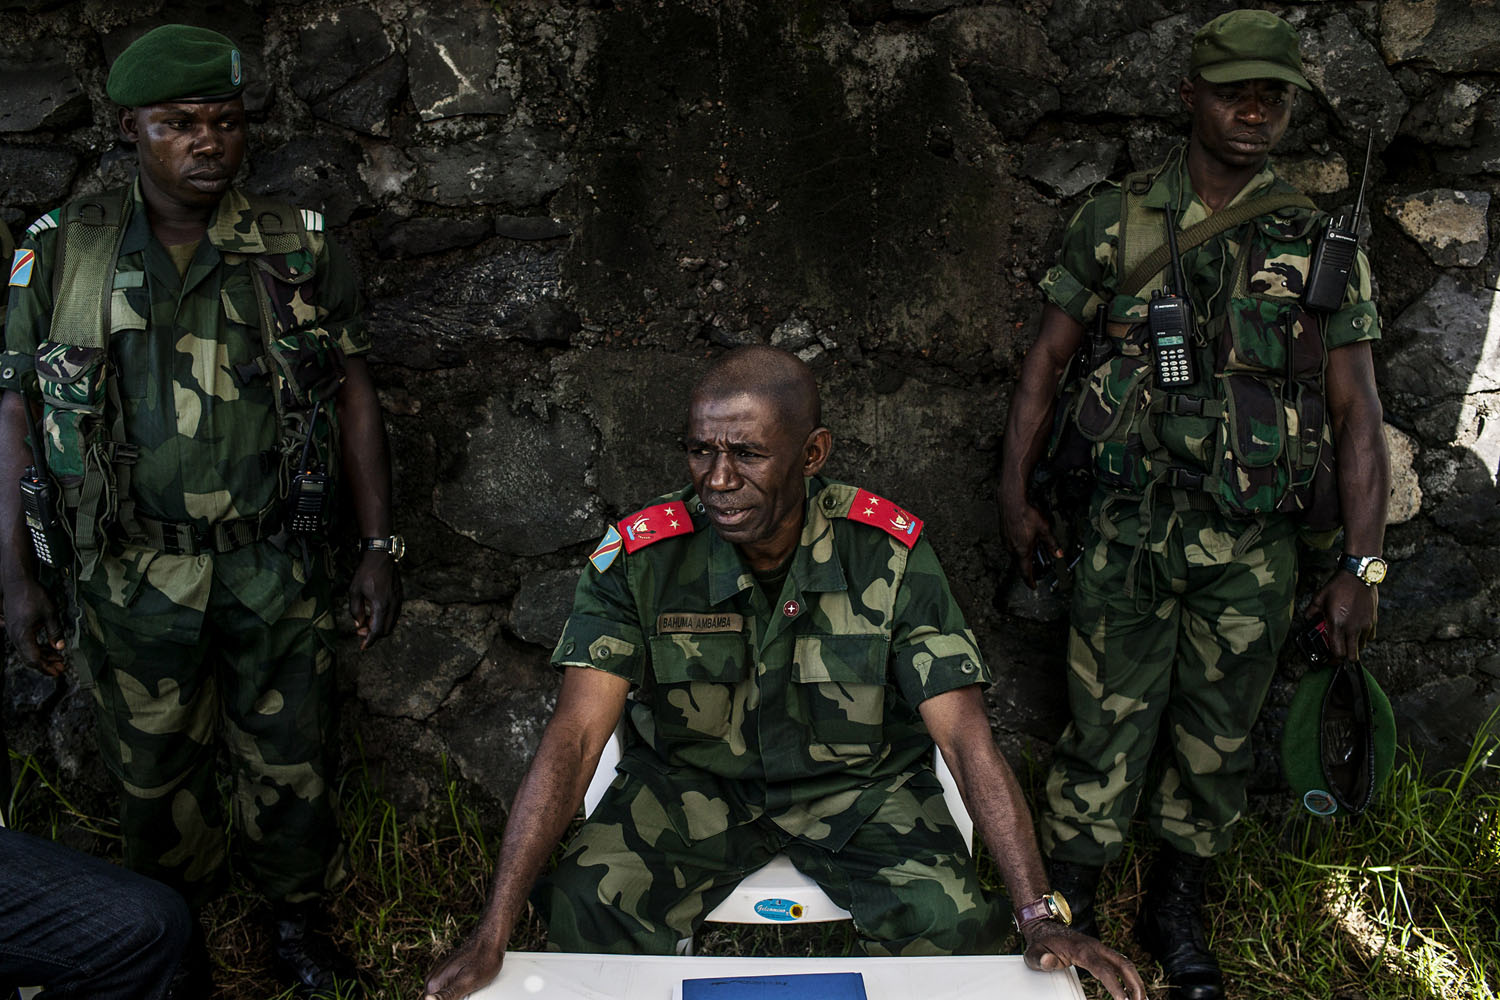  General Bahuma Ambamba, the commanding officer of all FARDC forces in eastern Congo's North Kivu Province, sits with his personal guards inside the FARDC command center in Munigi, outside Goma. General Bahuma was brought into command following the f